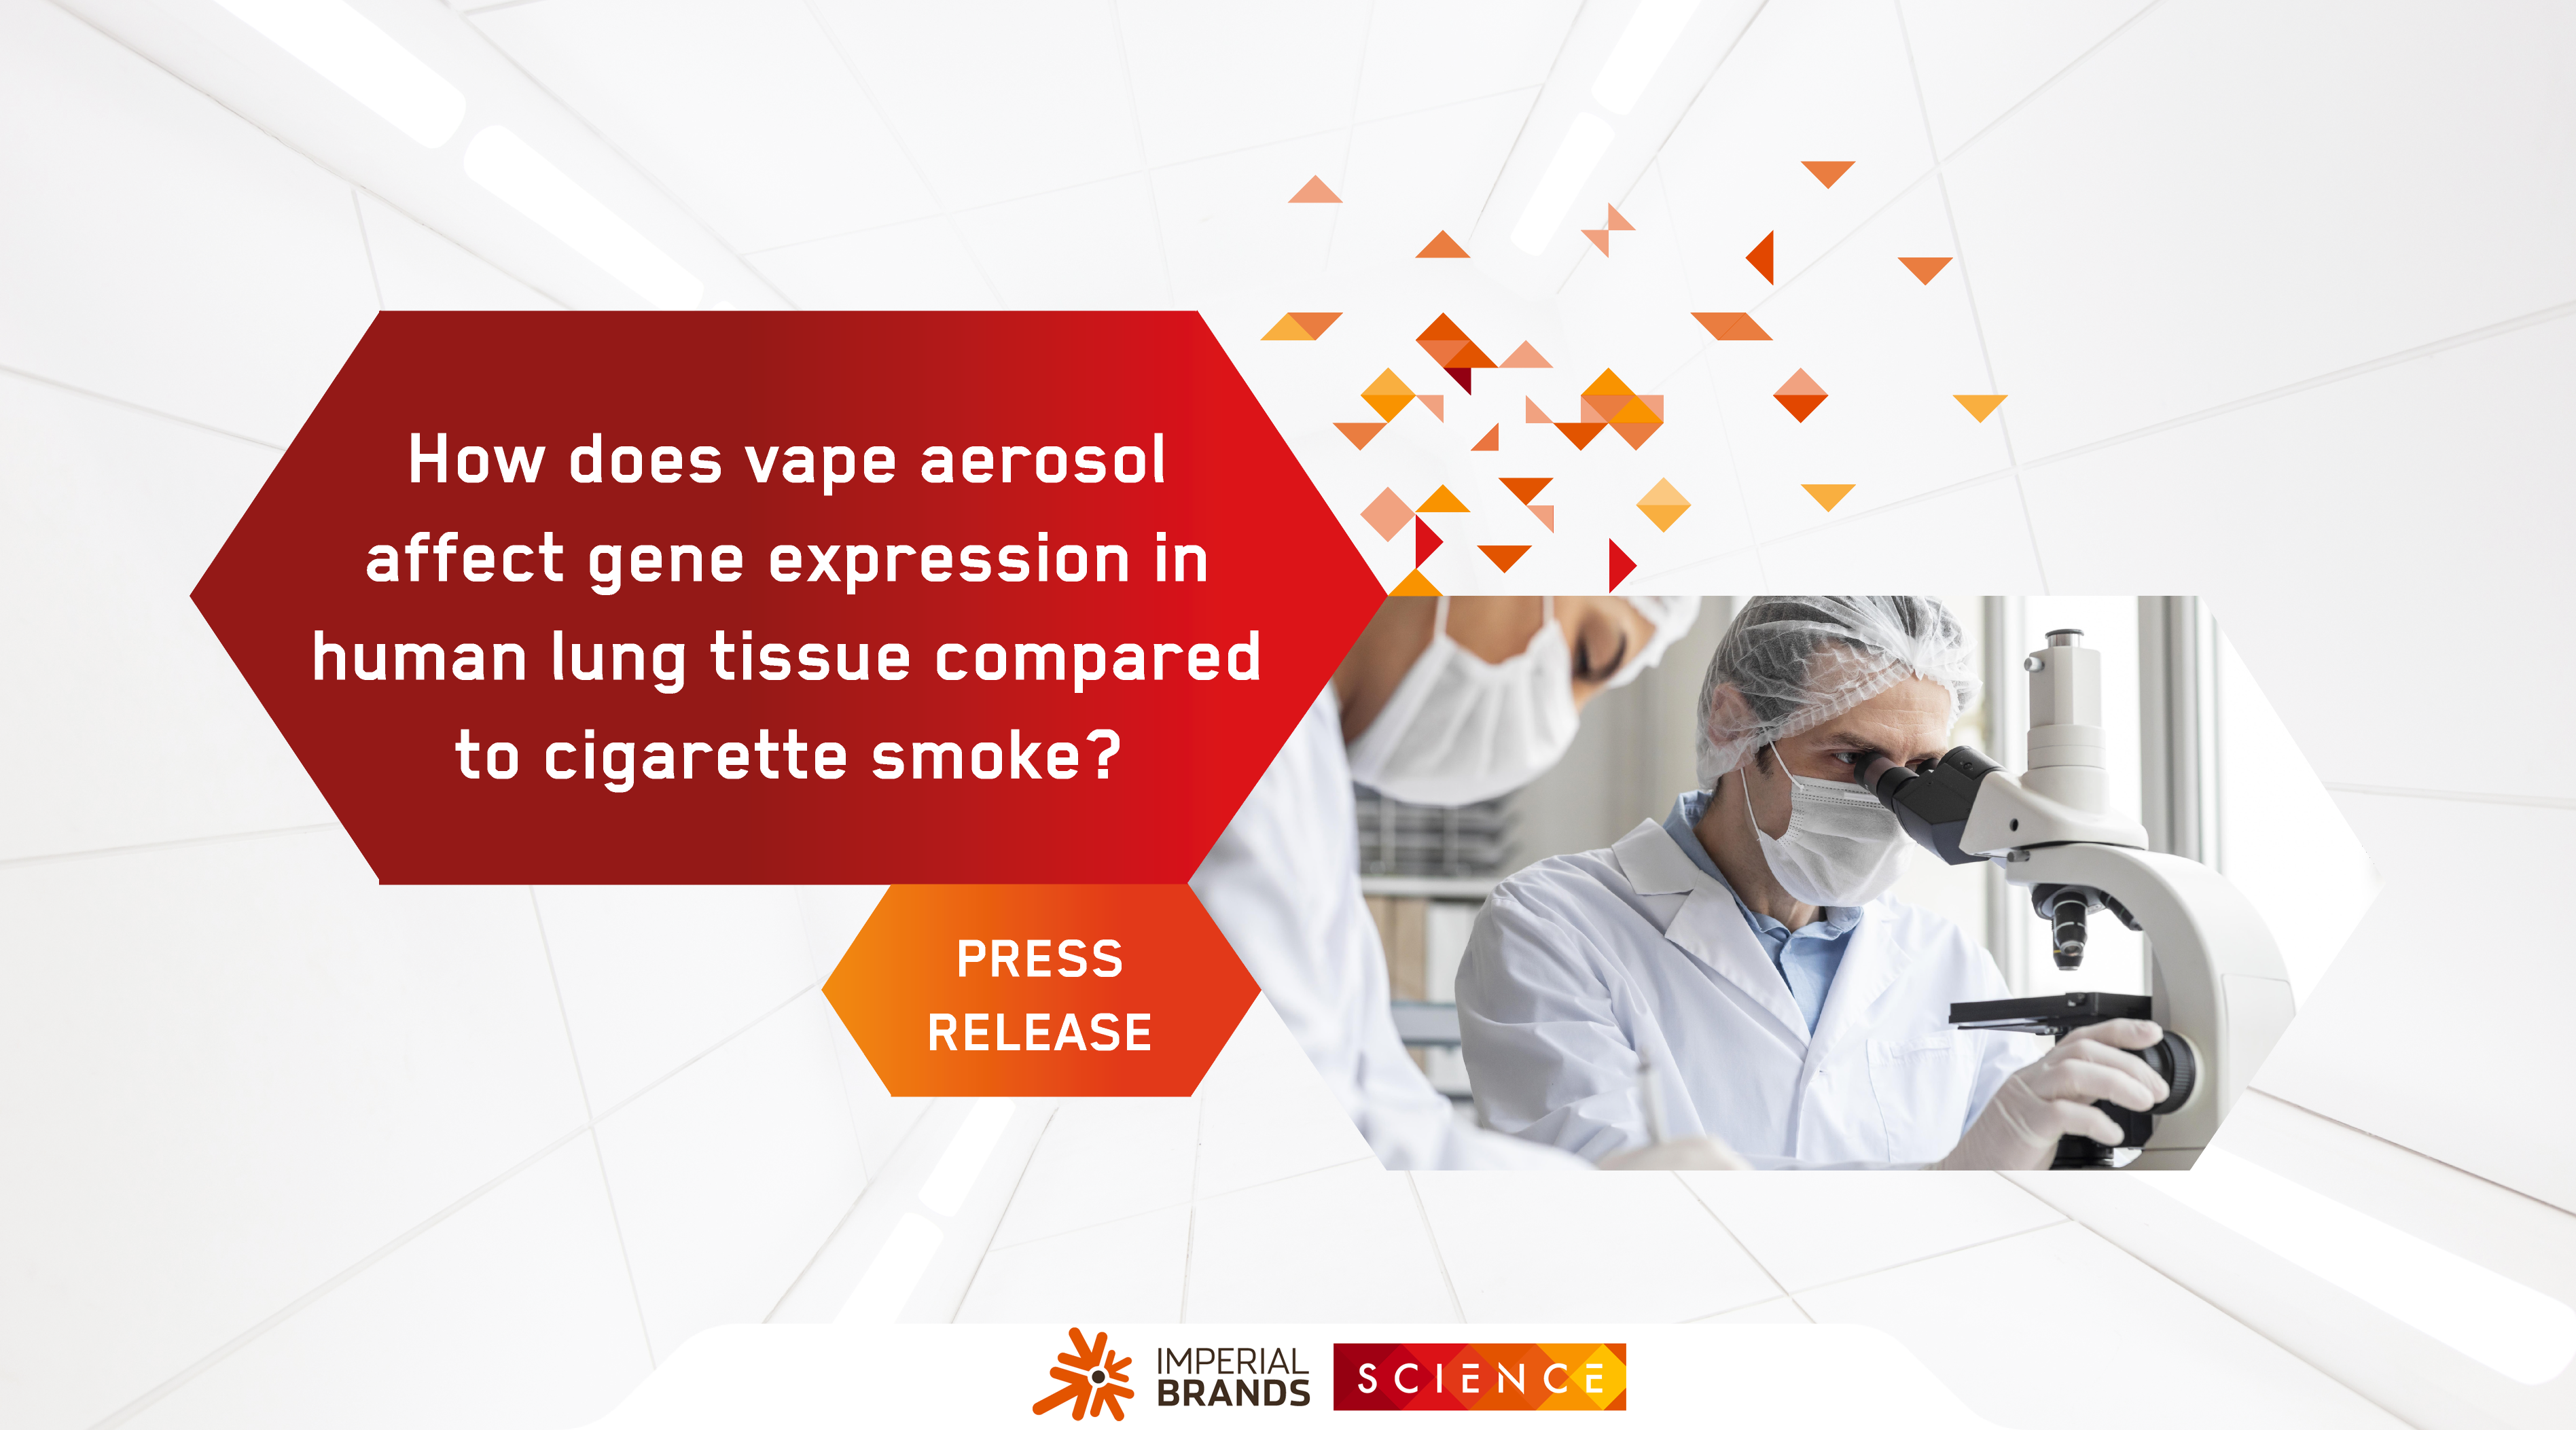 How does vape aerosol affect gene expression responses in human lung tissue compared to cigarette smoke?